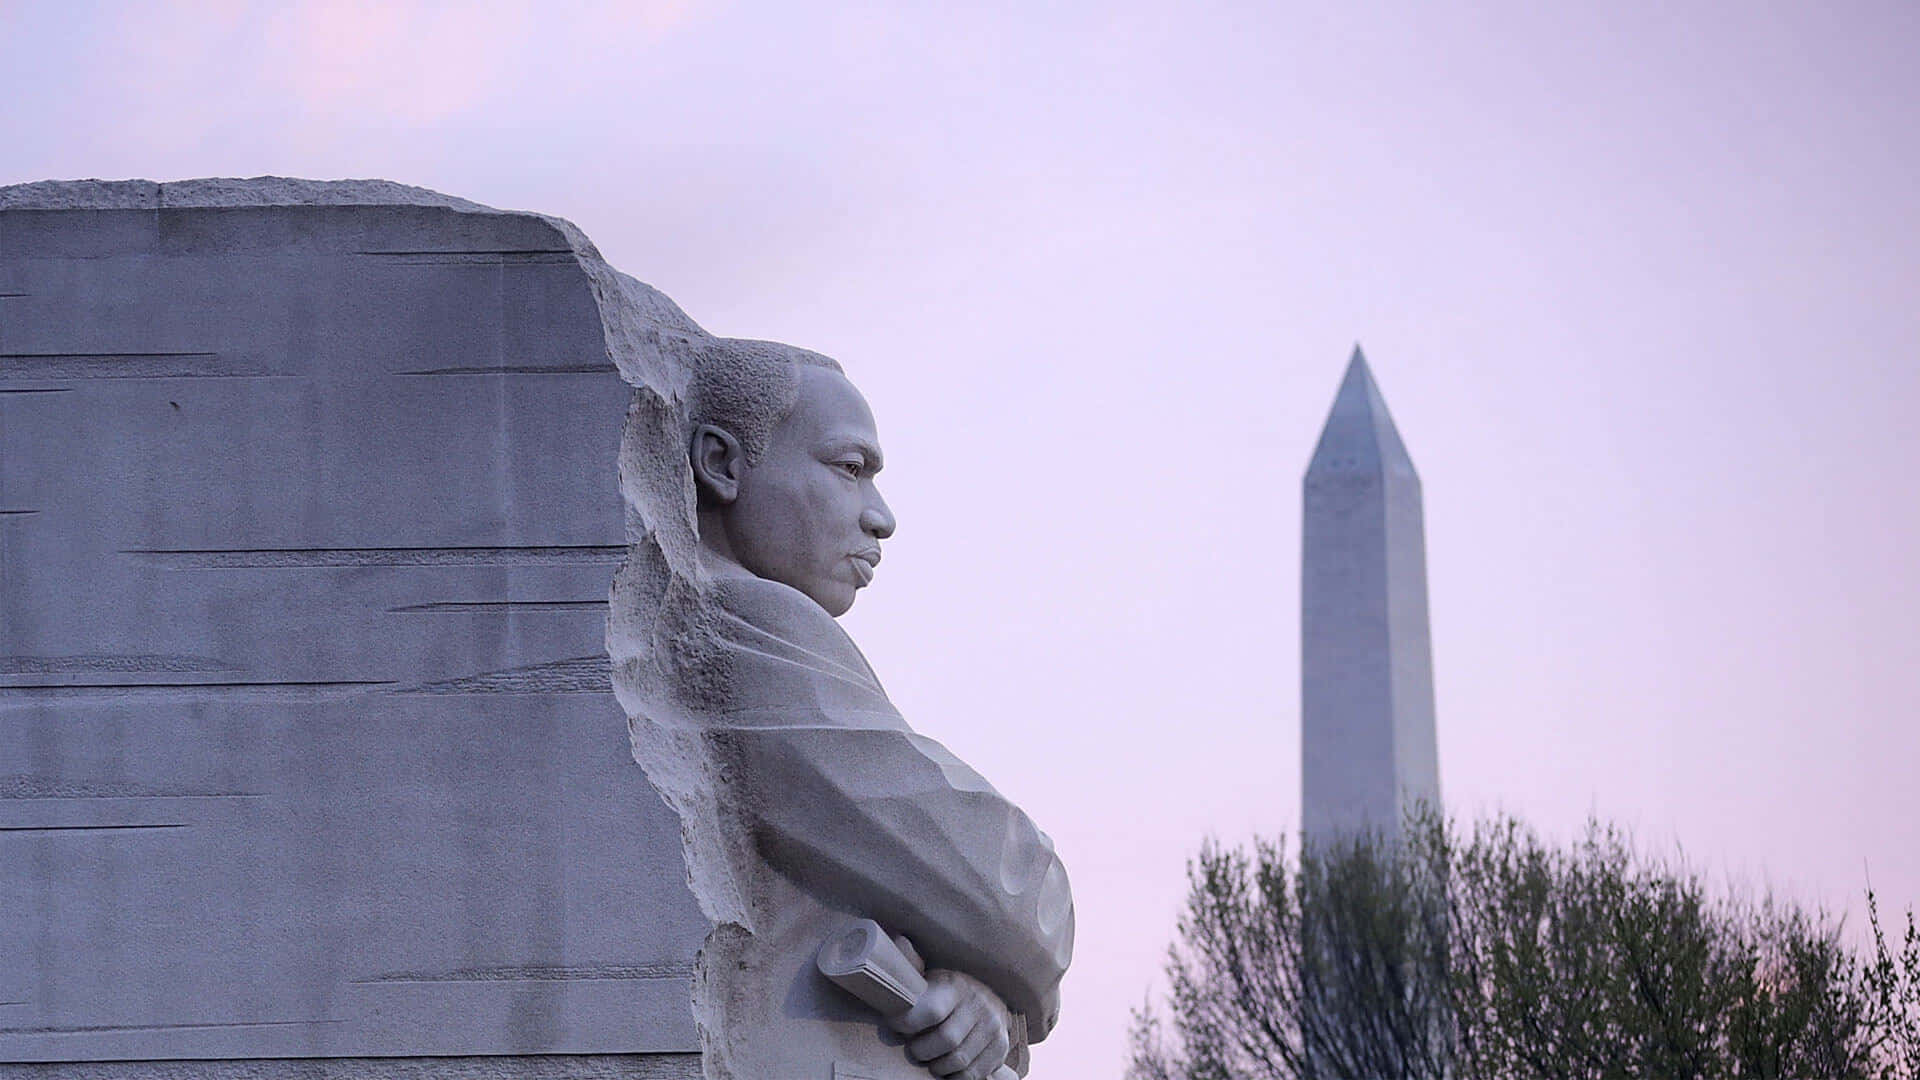 Revered Statue of Civil Rights Leader, Martin Luther King Jr. Wallpaper